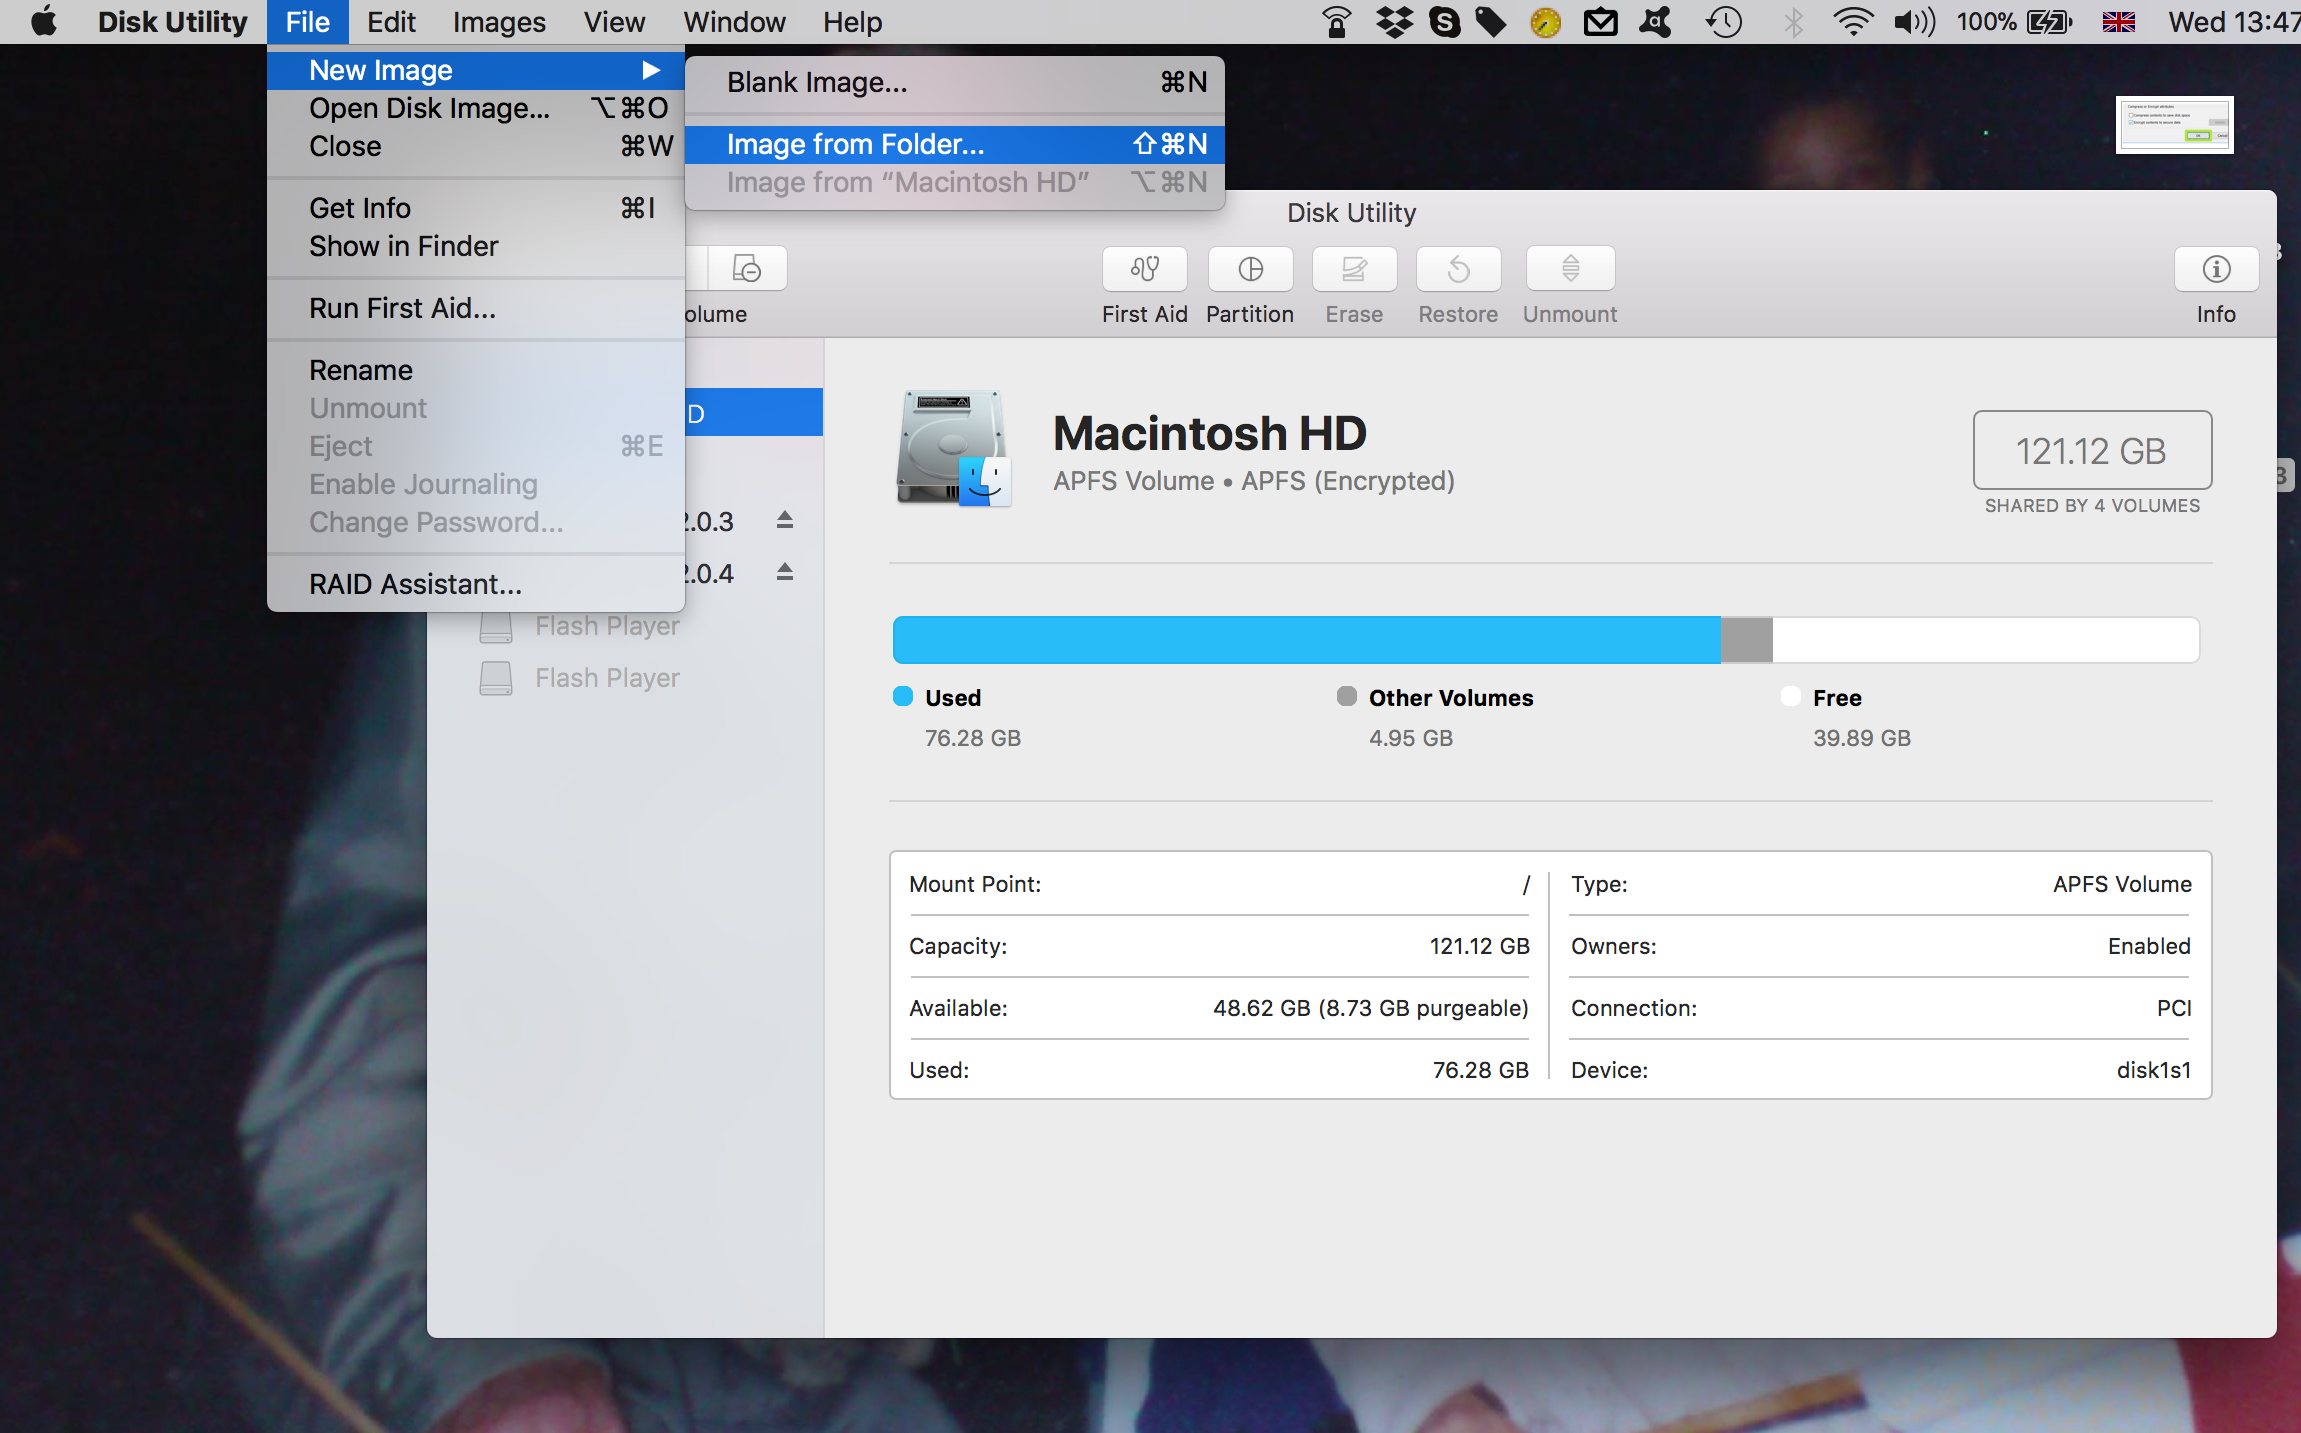 can an encrypted file for mac be open on windows